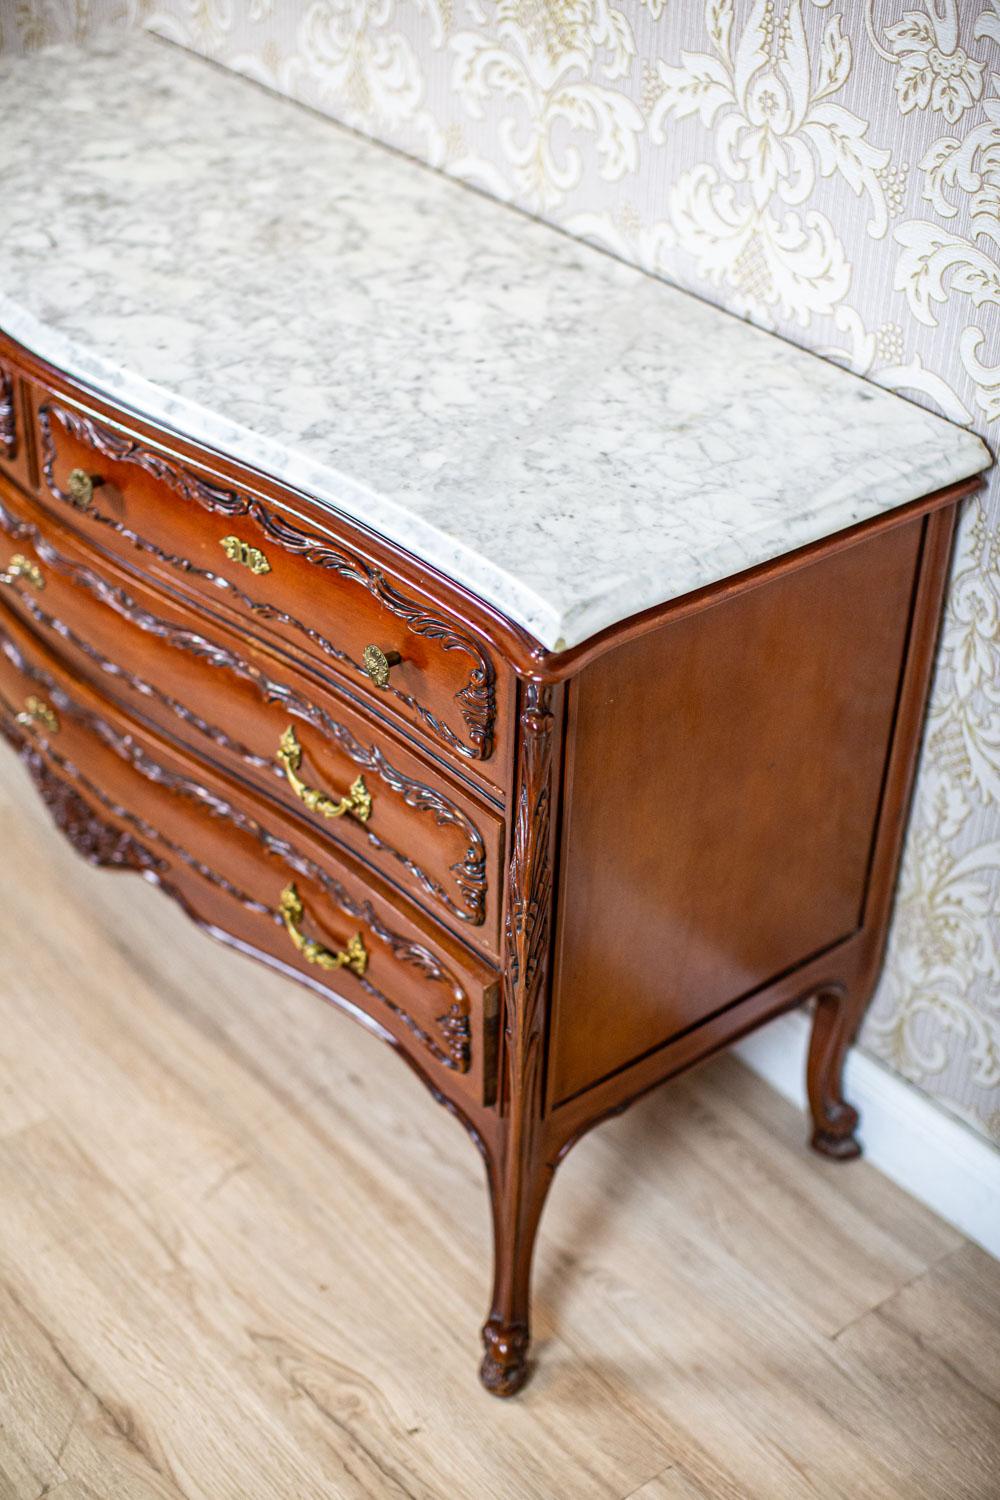 European Decorative Beech Dresser From the Mid. 20th Century with Marble Top